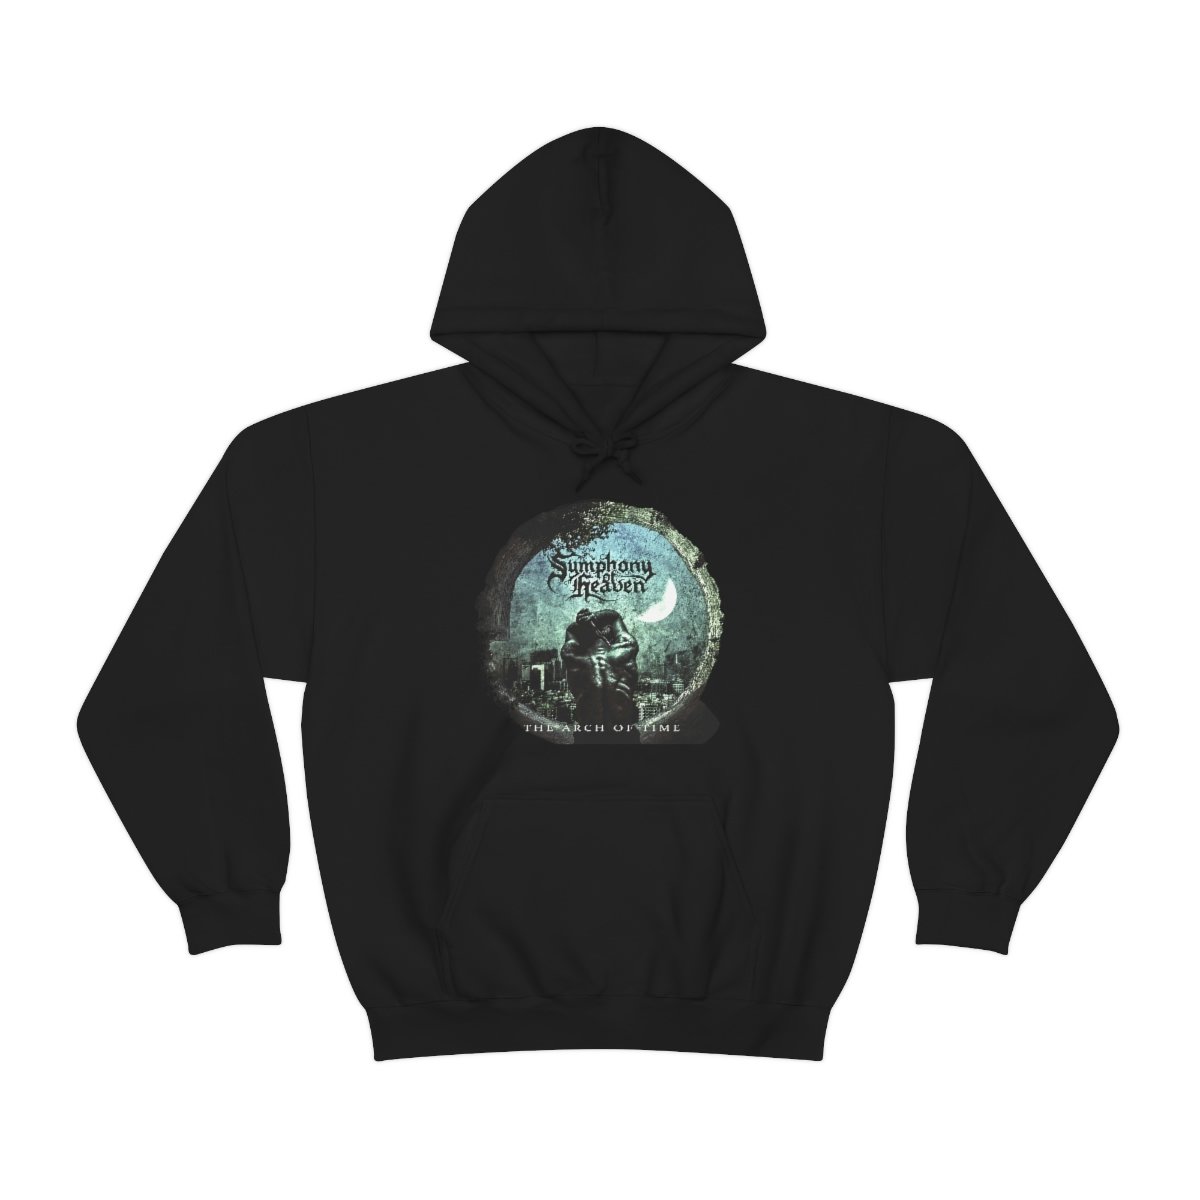 Symphony of Heaven – The Arch of Time Pullover Hooded Sweatshirt